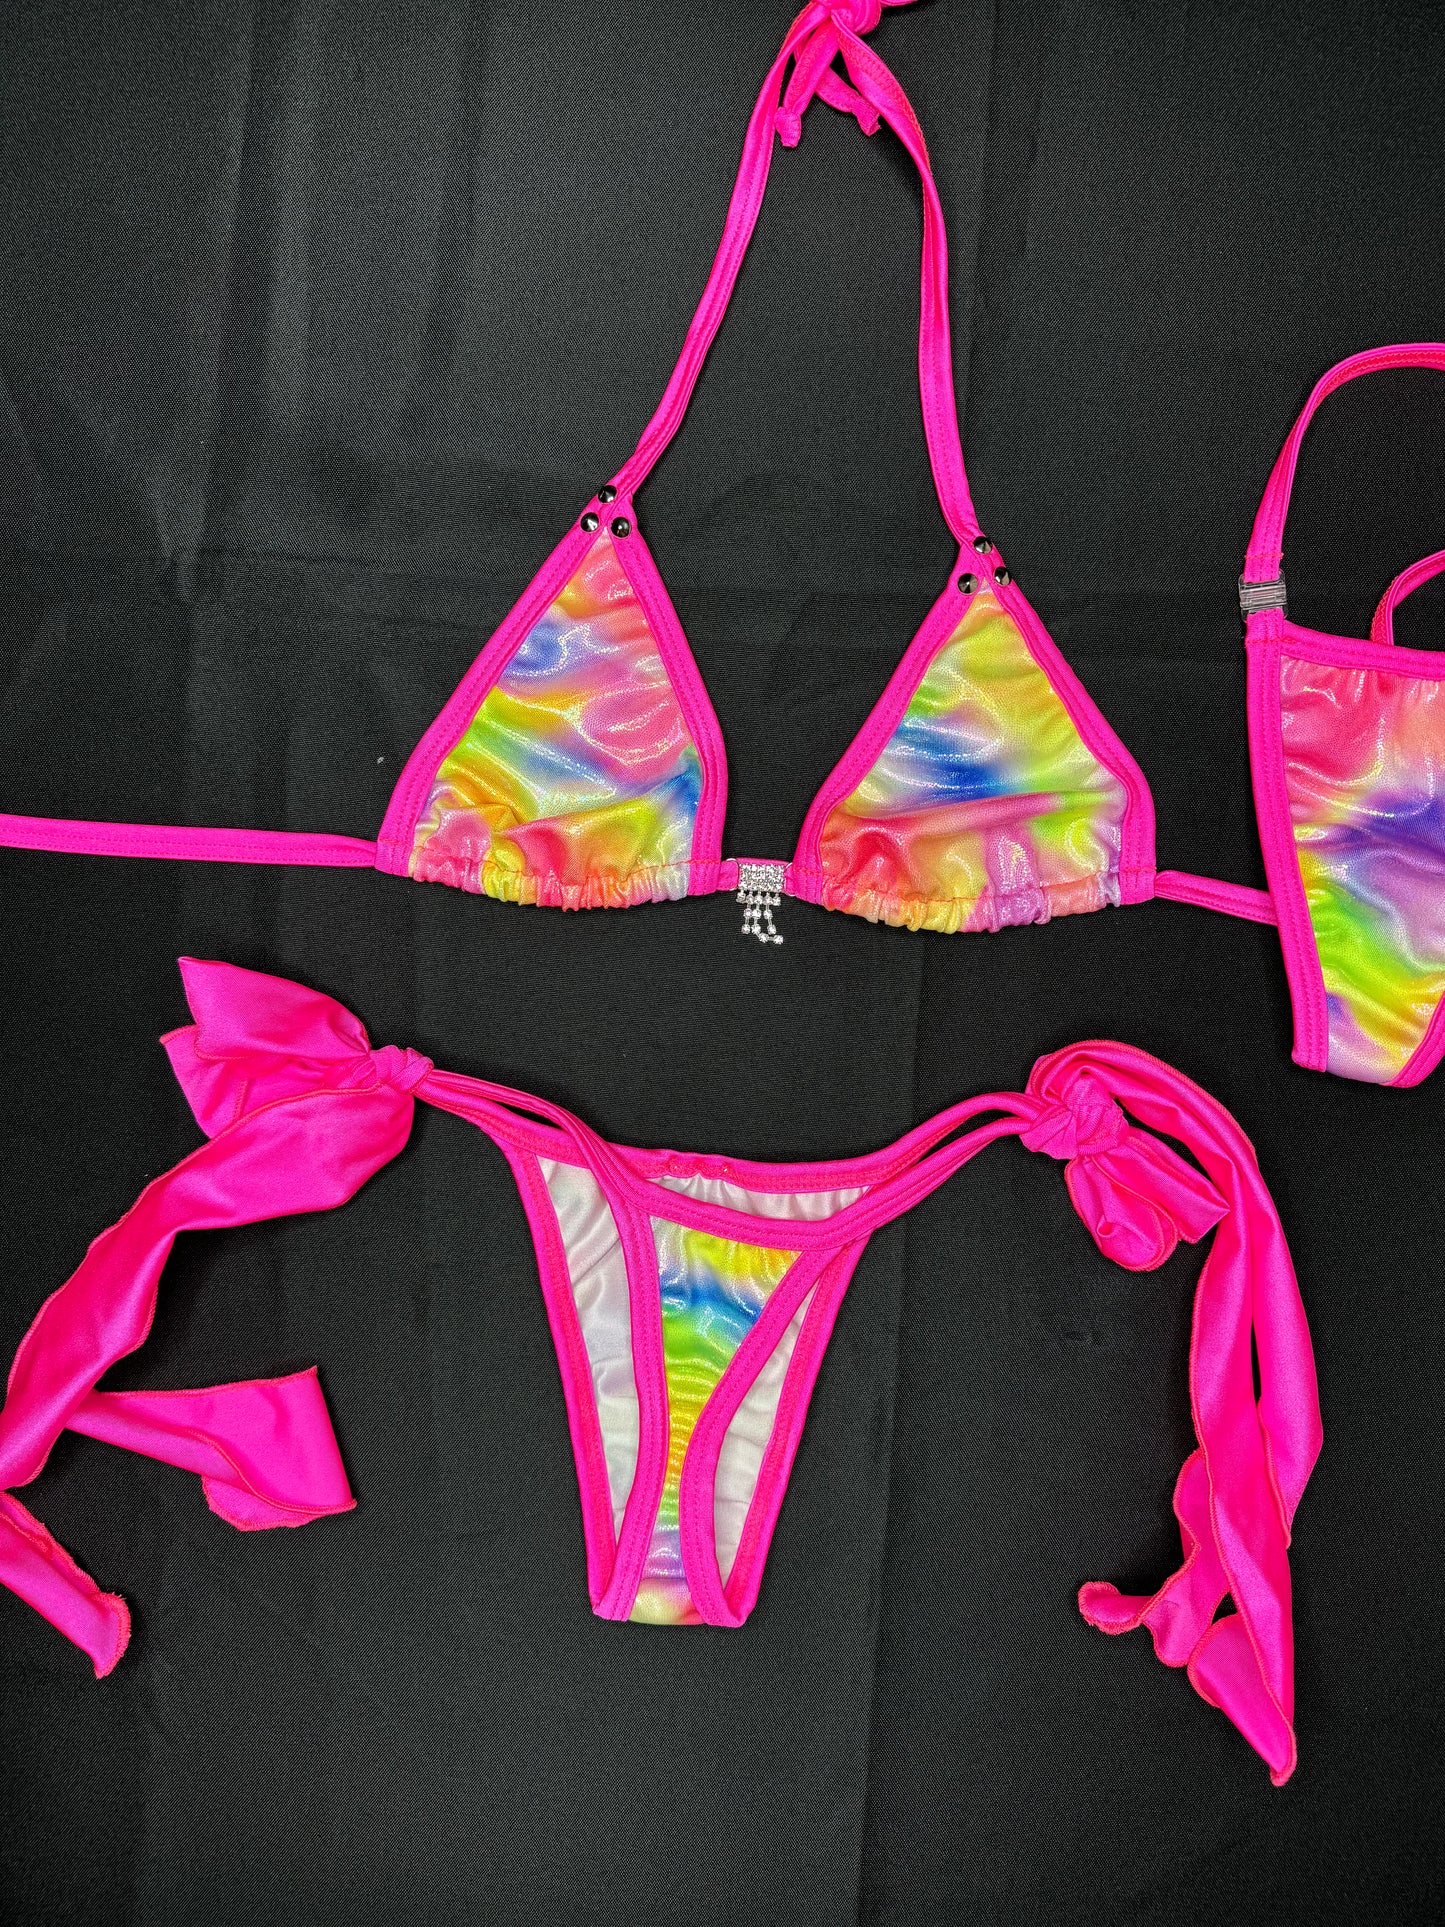 Hot Pink/Mystic Rainbow Two-Piece Lingerie Bikini Outfit